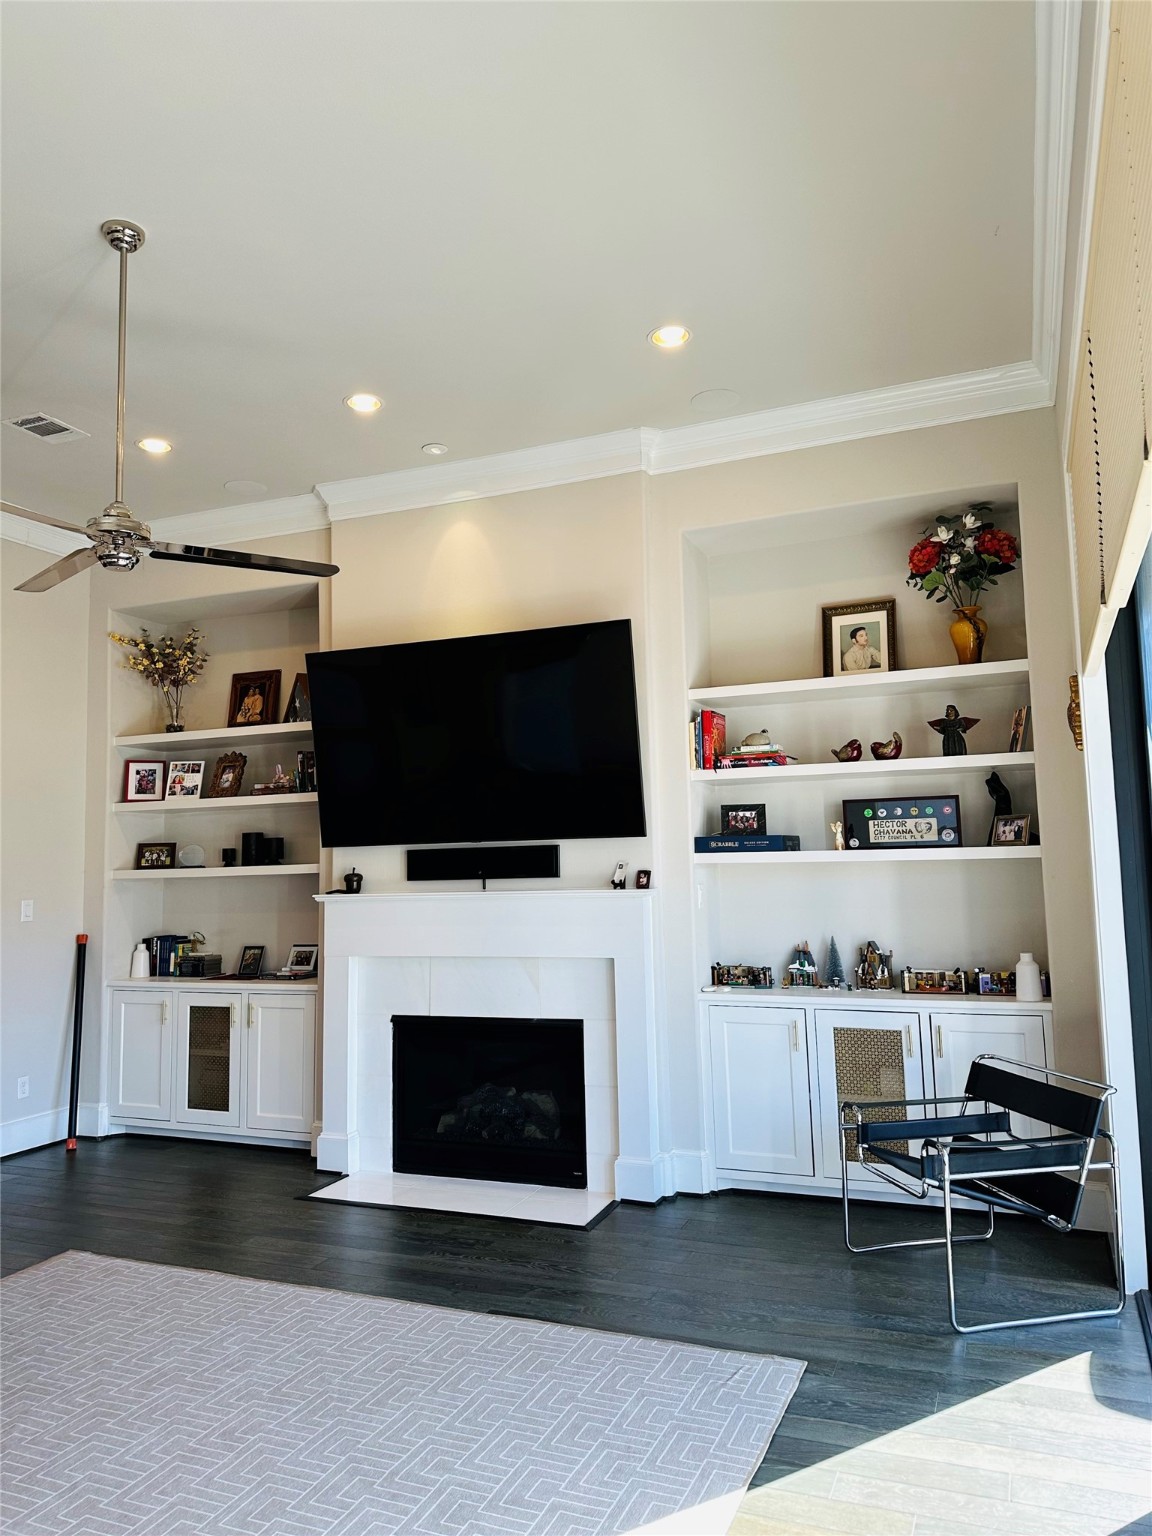 Custom built ins, gas fireplace, surround sound for family movie nights.